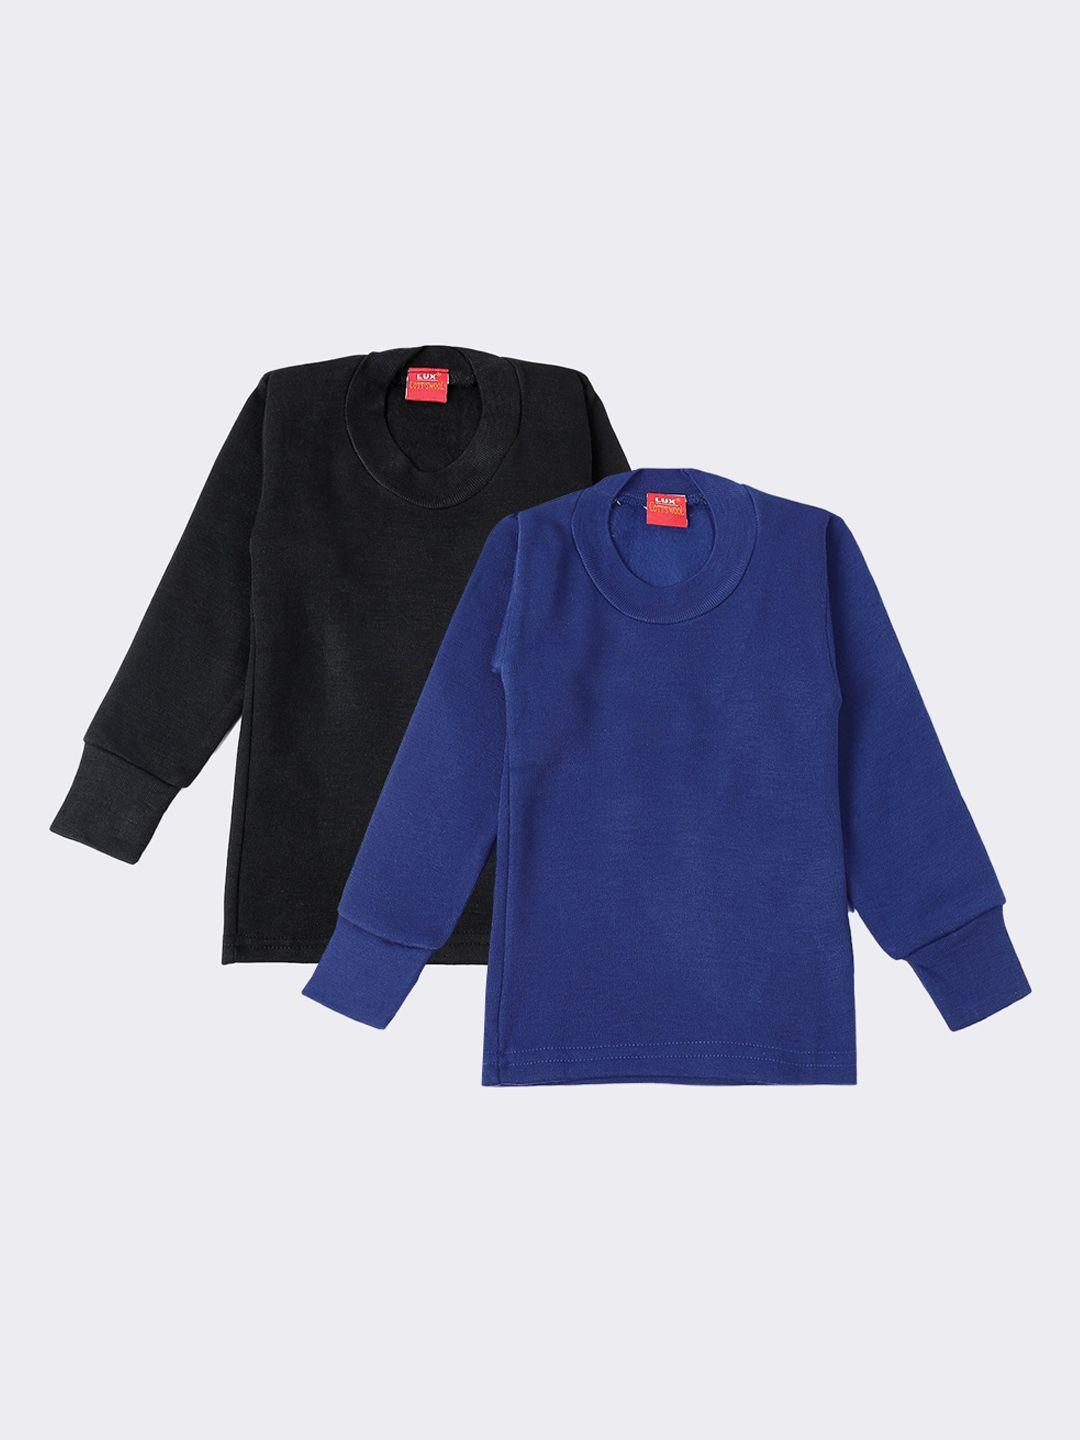 lux cottswool boys pack of 2 blue & black solid cotton thermal tops